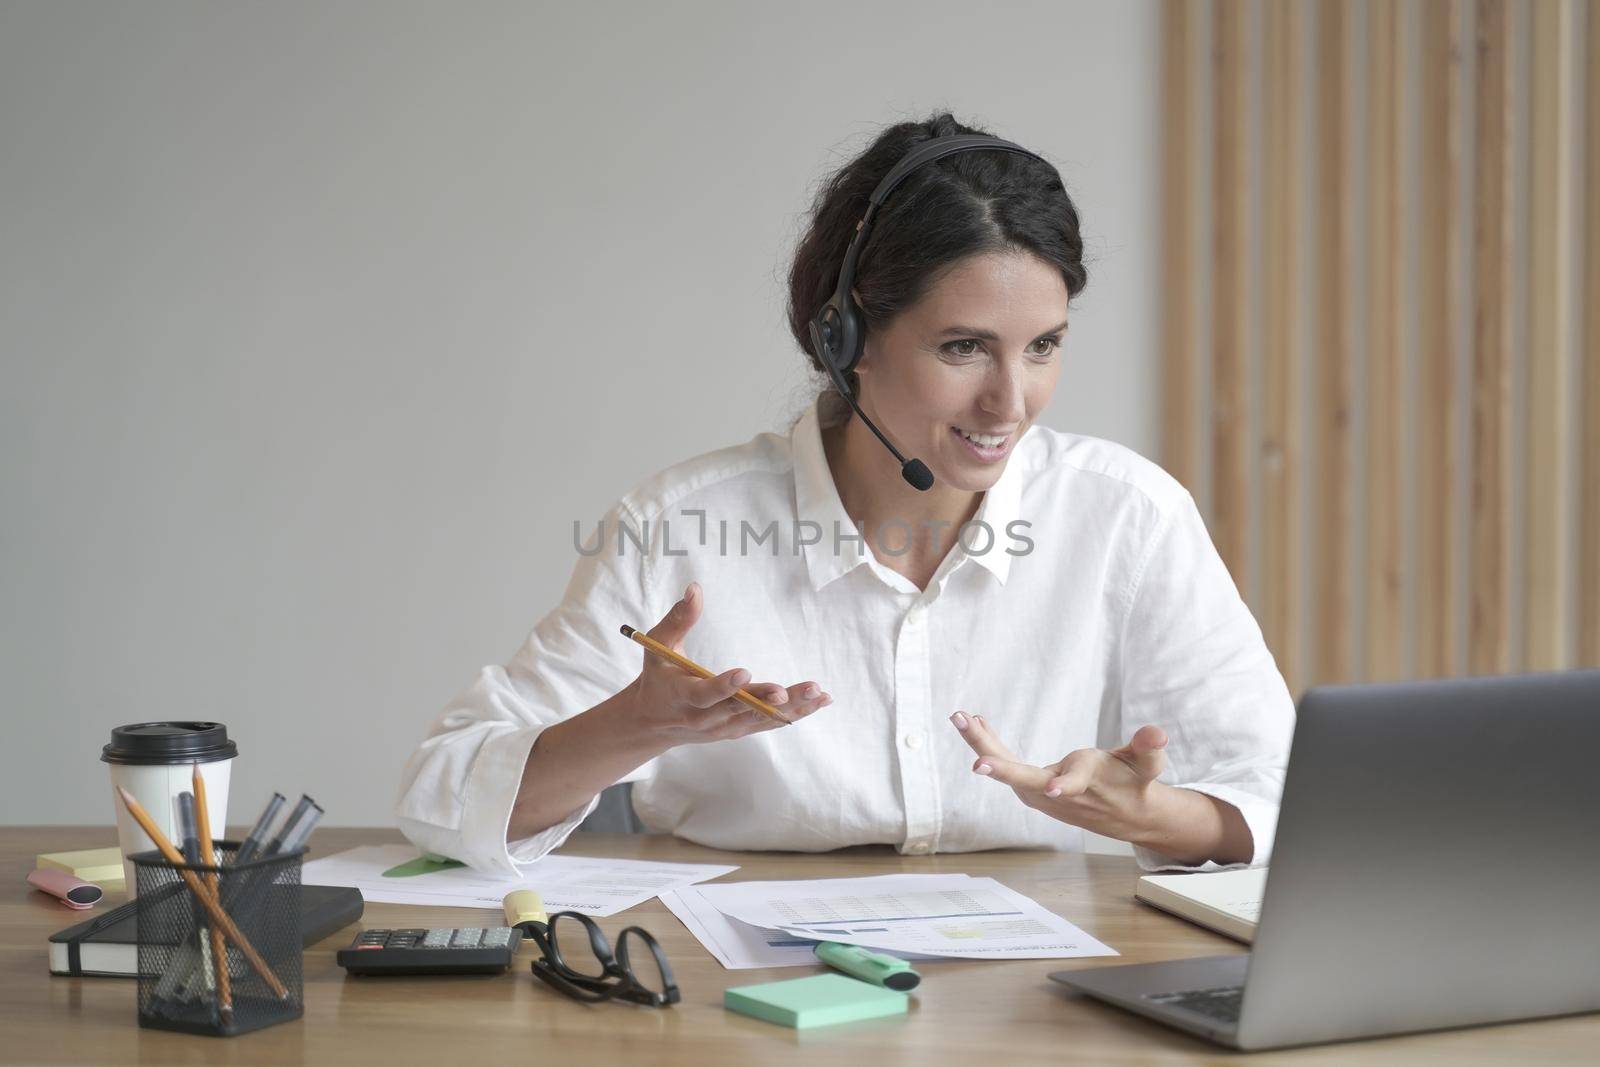 Smiling woman online tutor sitting at desk in headset and talking by video call on laptop computer by vkstock